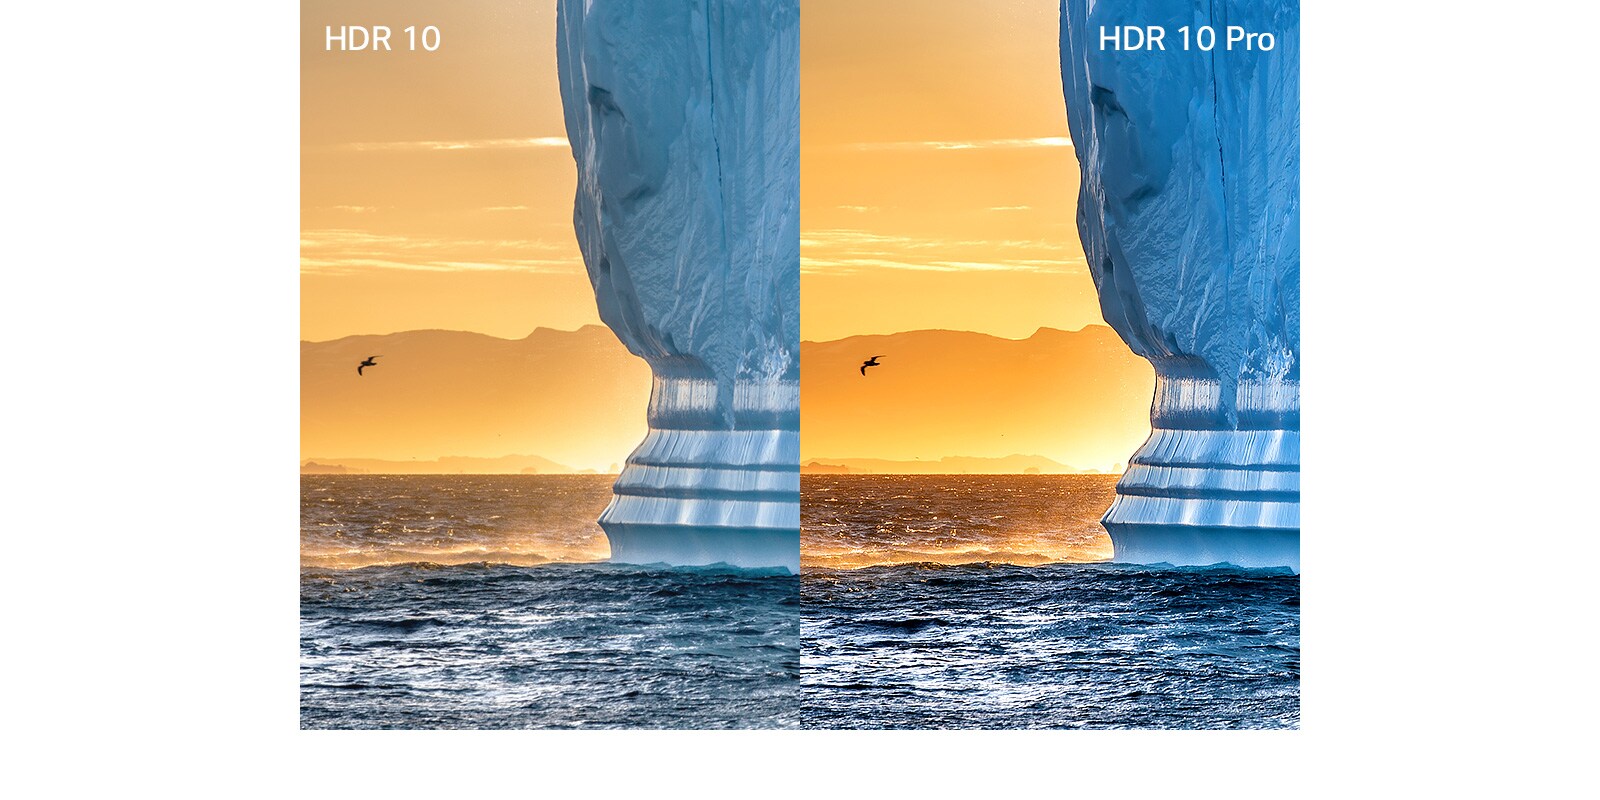 An image of a large cliff emerging from the water against an orange sunset. The left shows the image in HDR, and the right in HDR 10 Pro with greater detail.